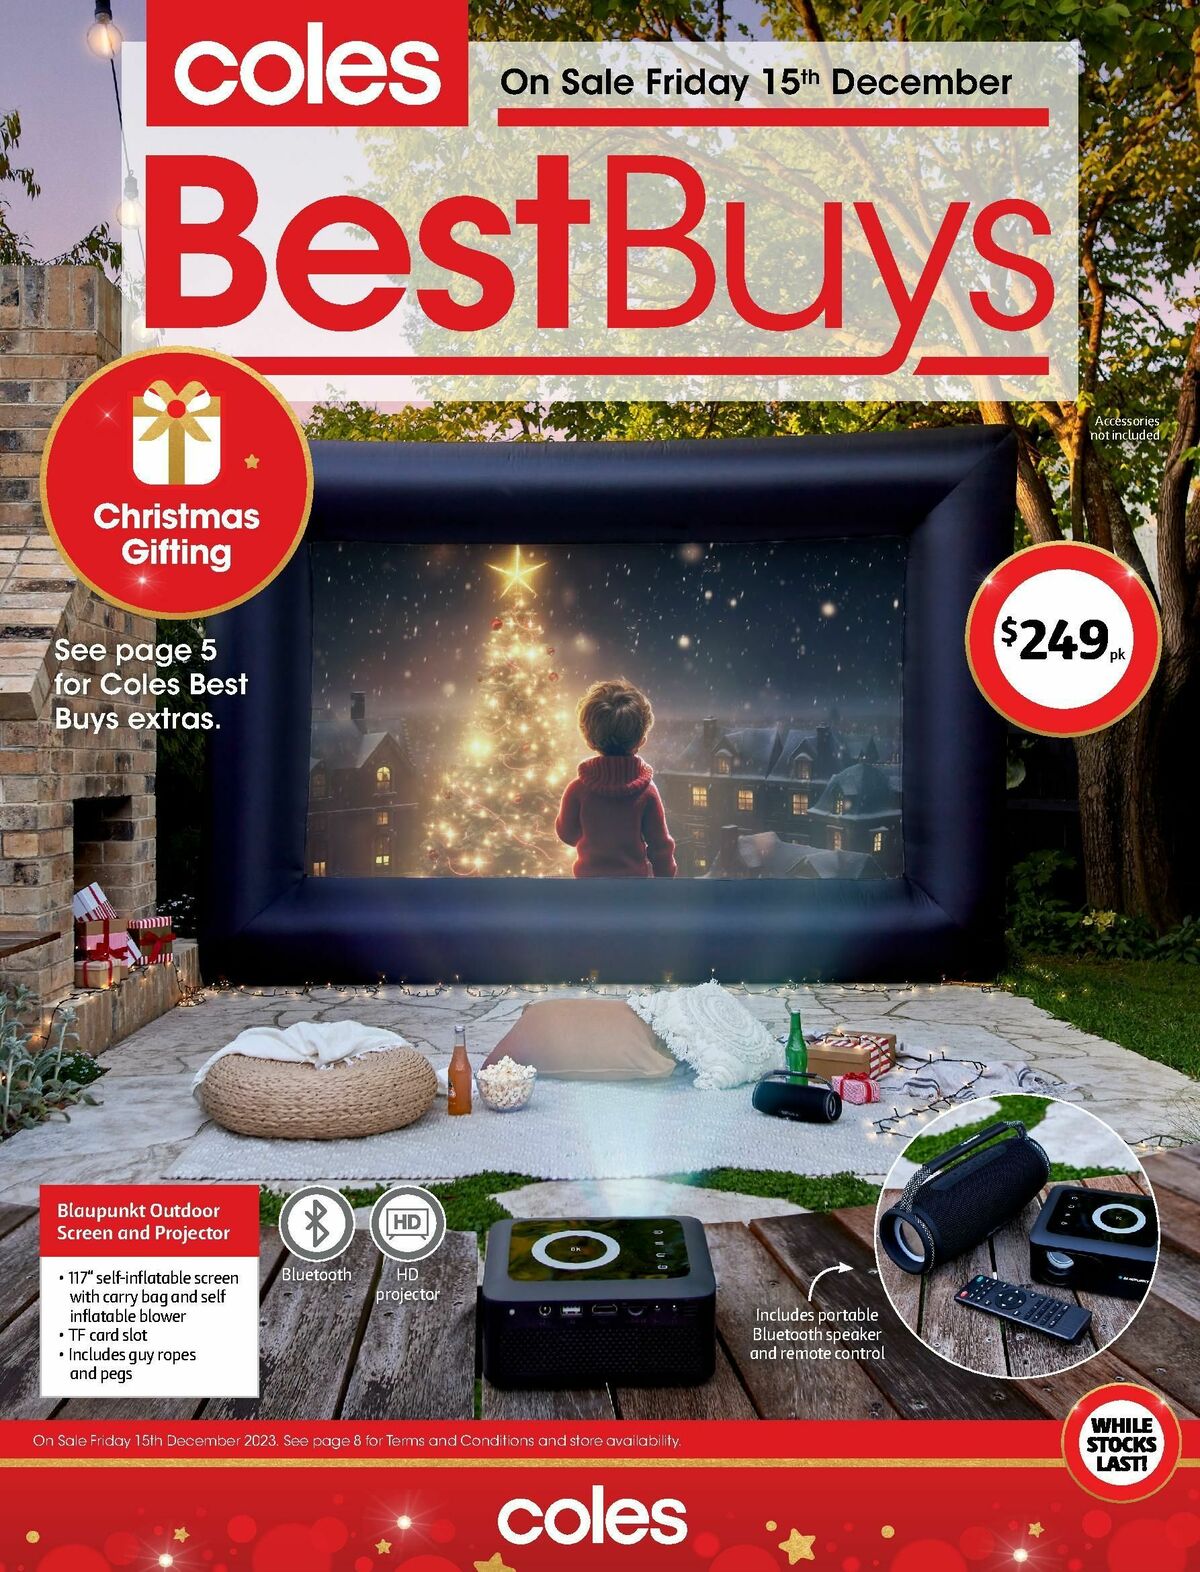 Coles Best Buys - Christmas Gifting Catalogues from 15 December